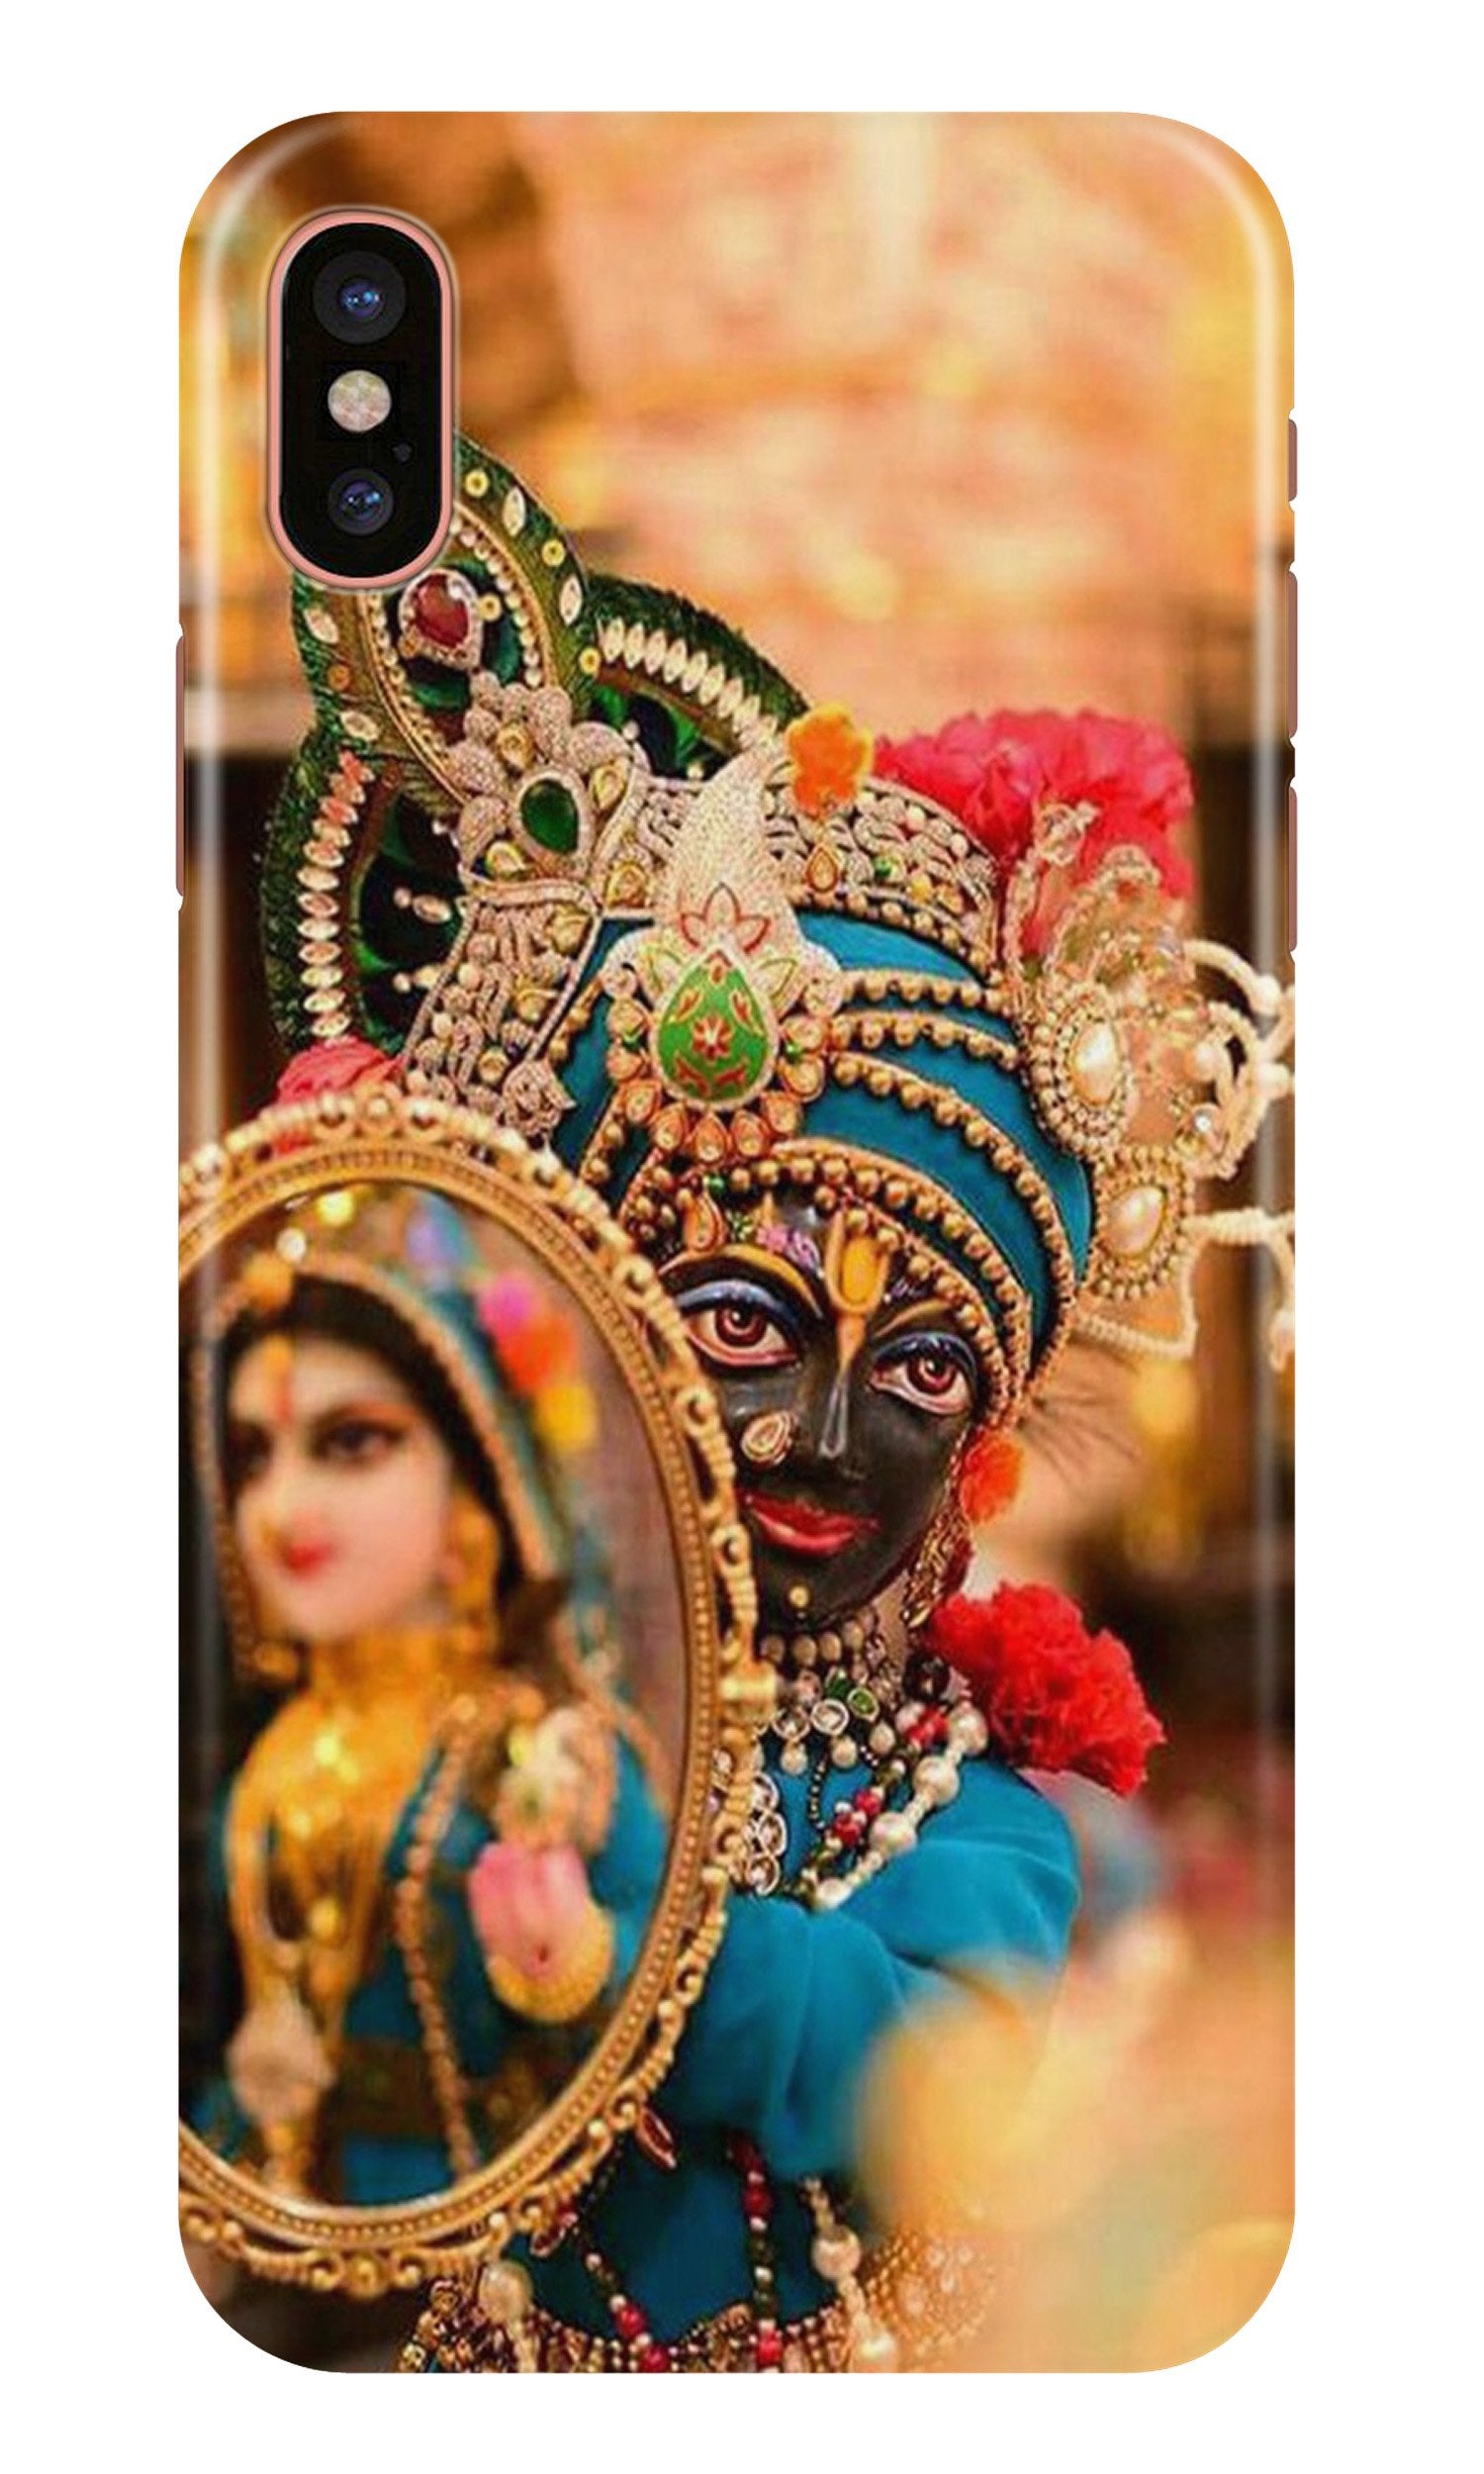 Lord Krishna5 Case for iPhone X